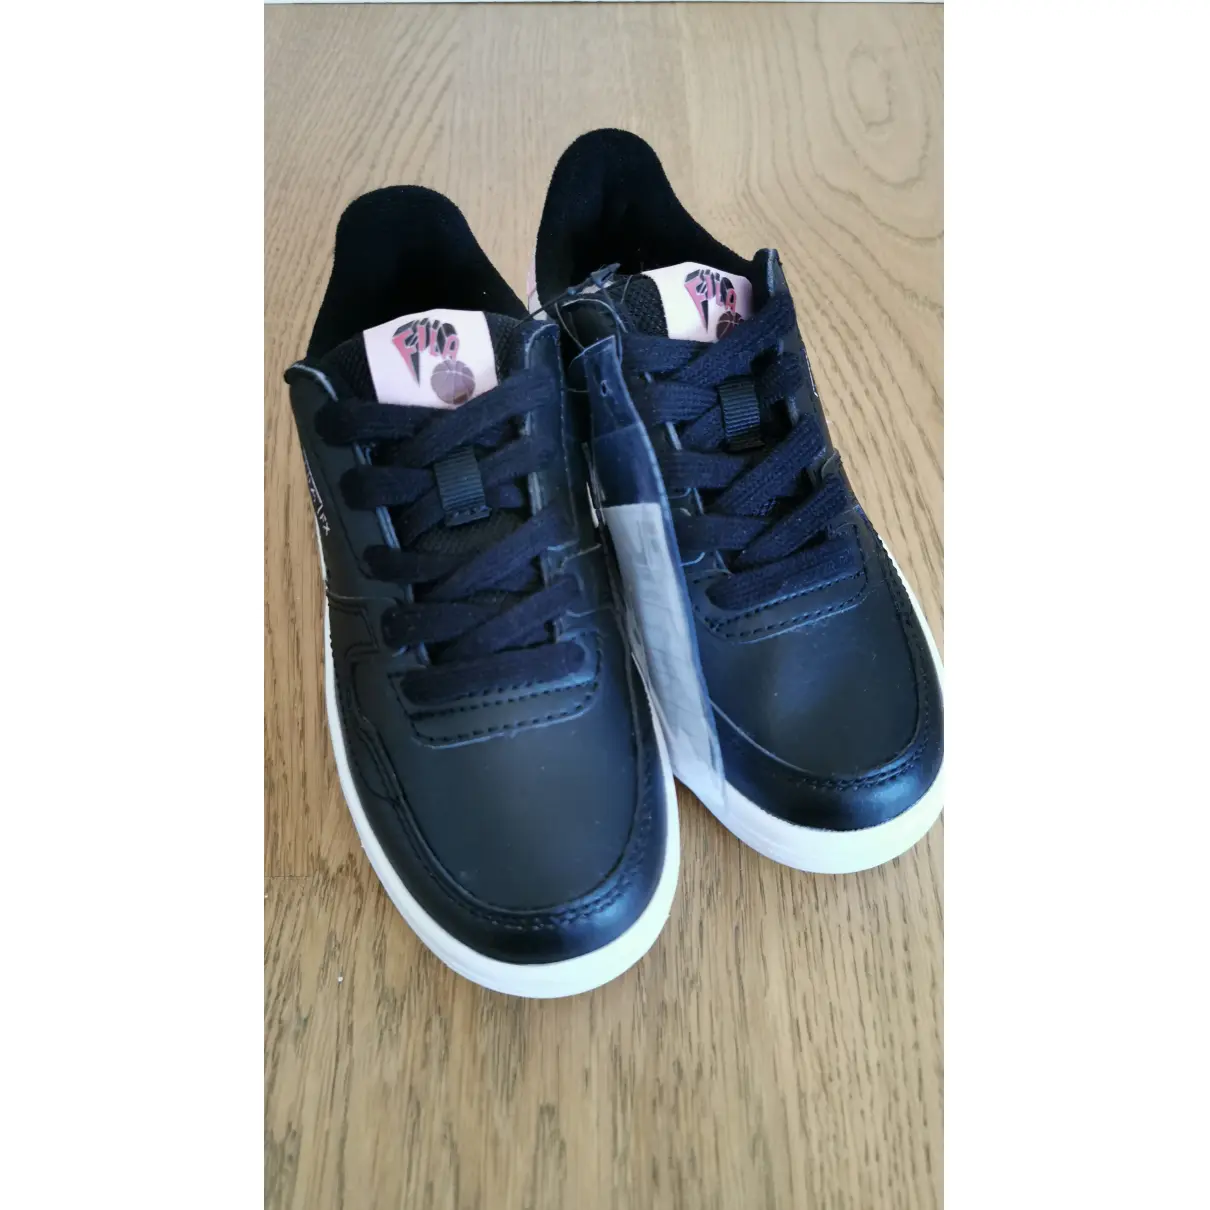 Buy Fila Leather trainers online